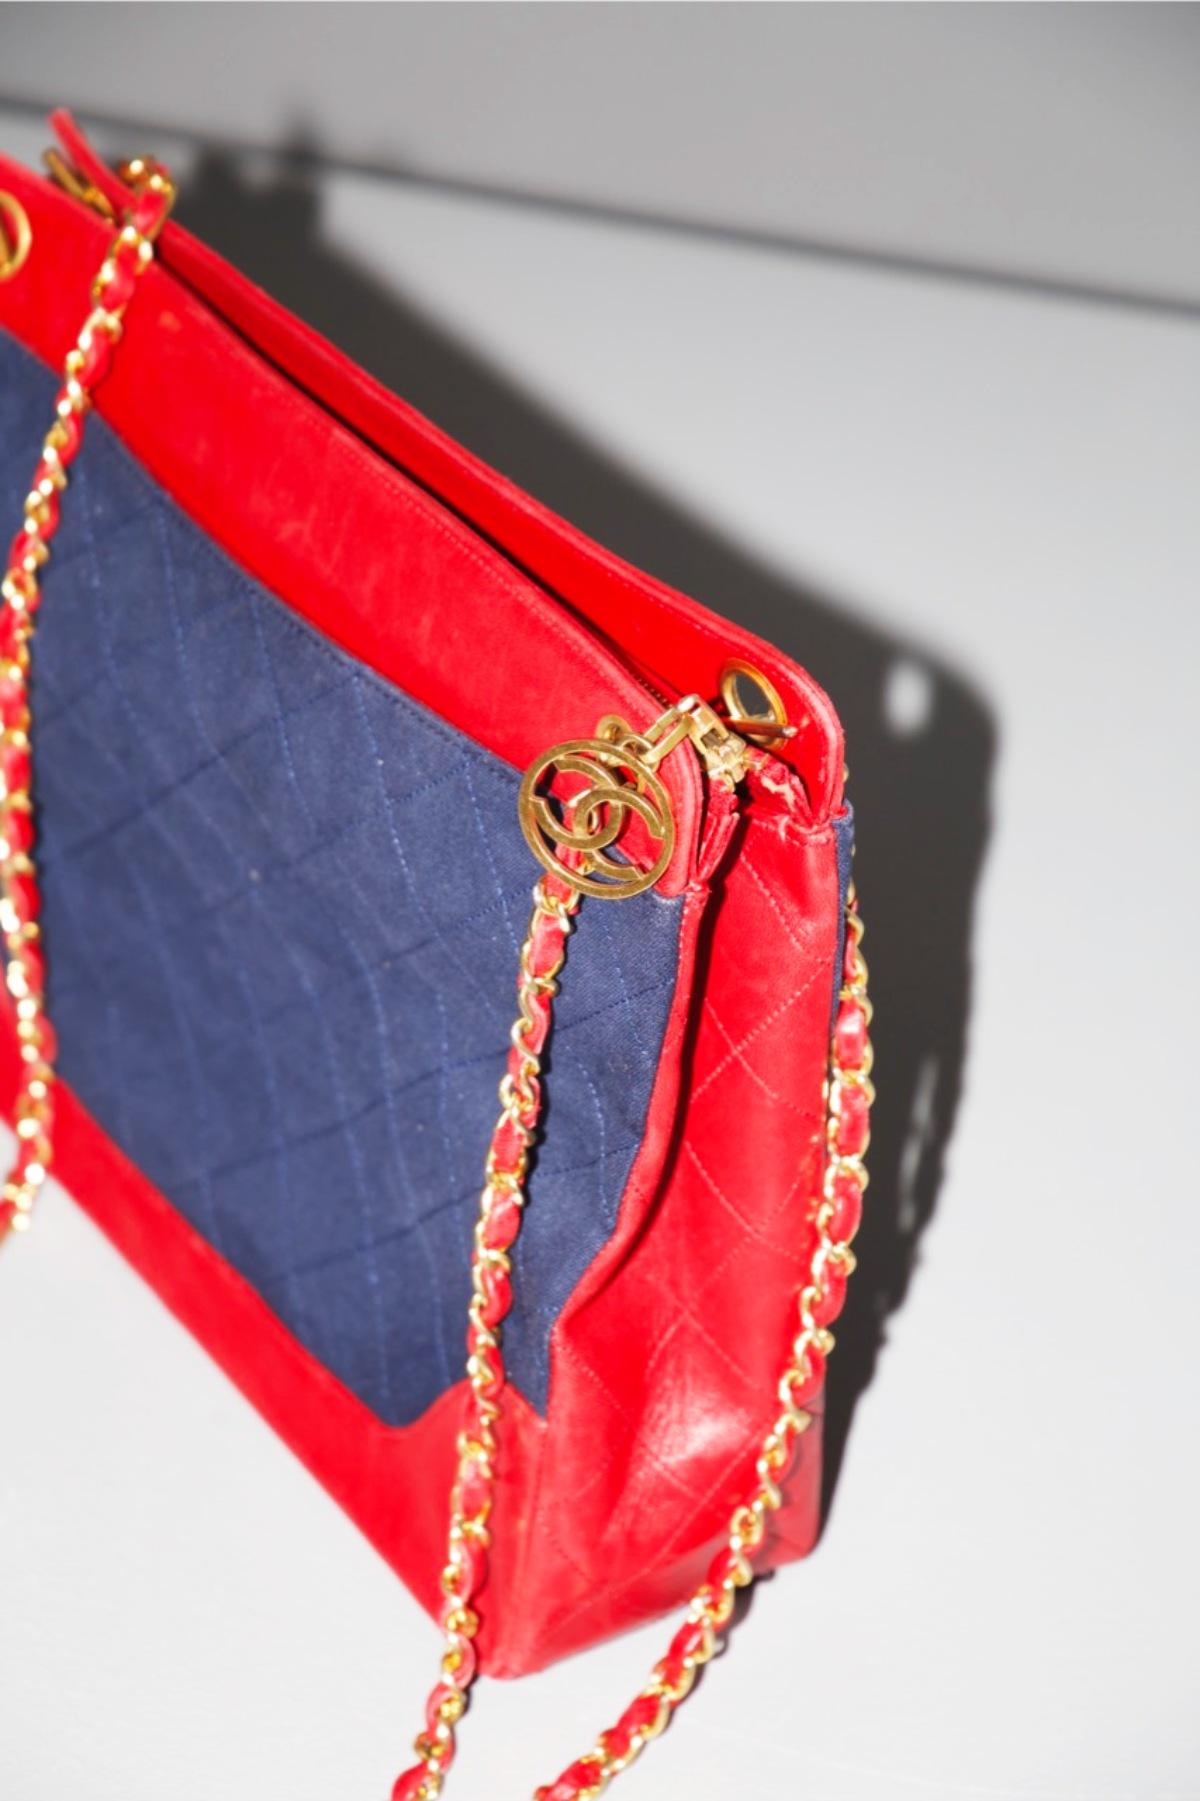 Rare Chanel Shoulder Bag in Red Leather and Denim Fabric In Good Condition For Sale In Milano, IT